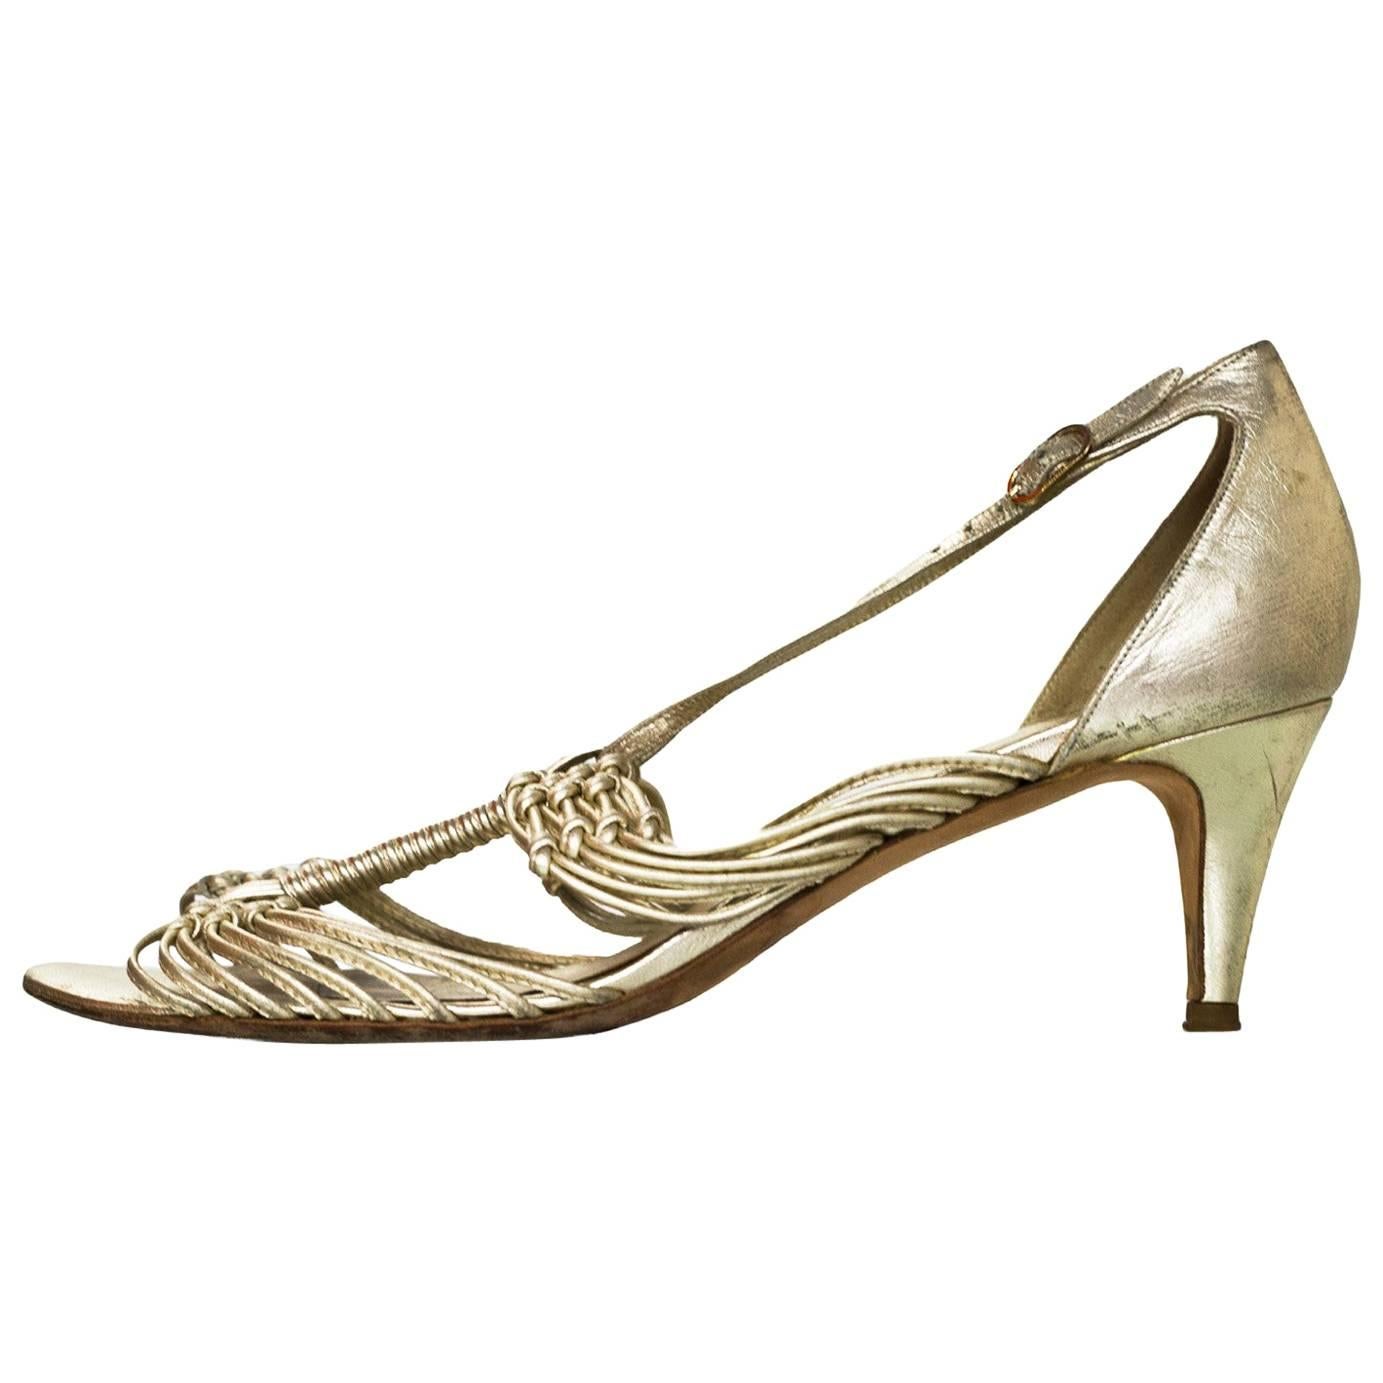 Chanel Gold Leather Strappy Sandals Sz 40.5